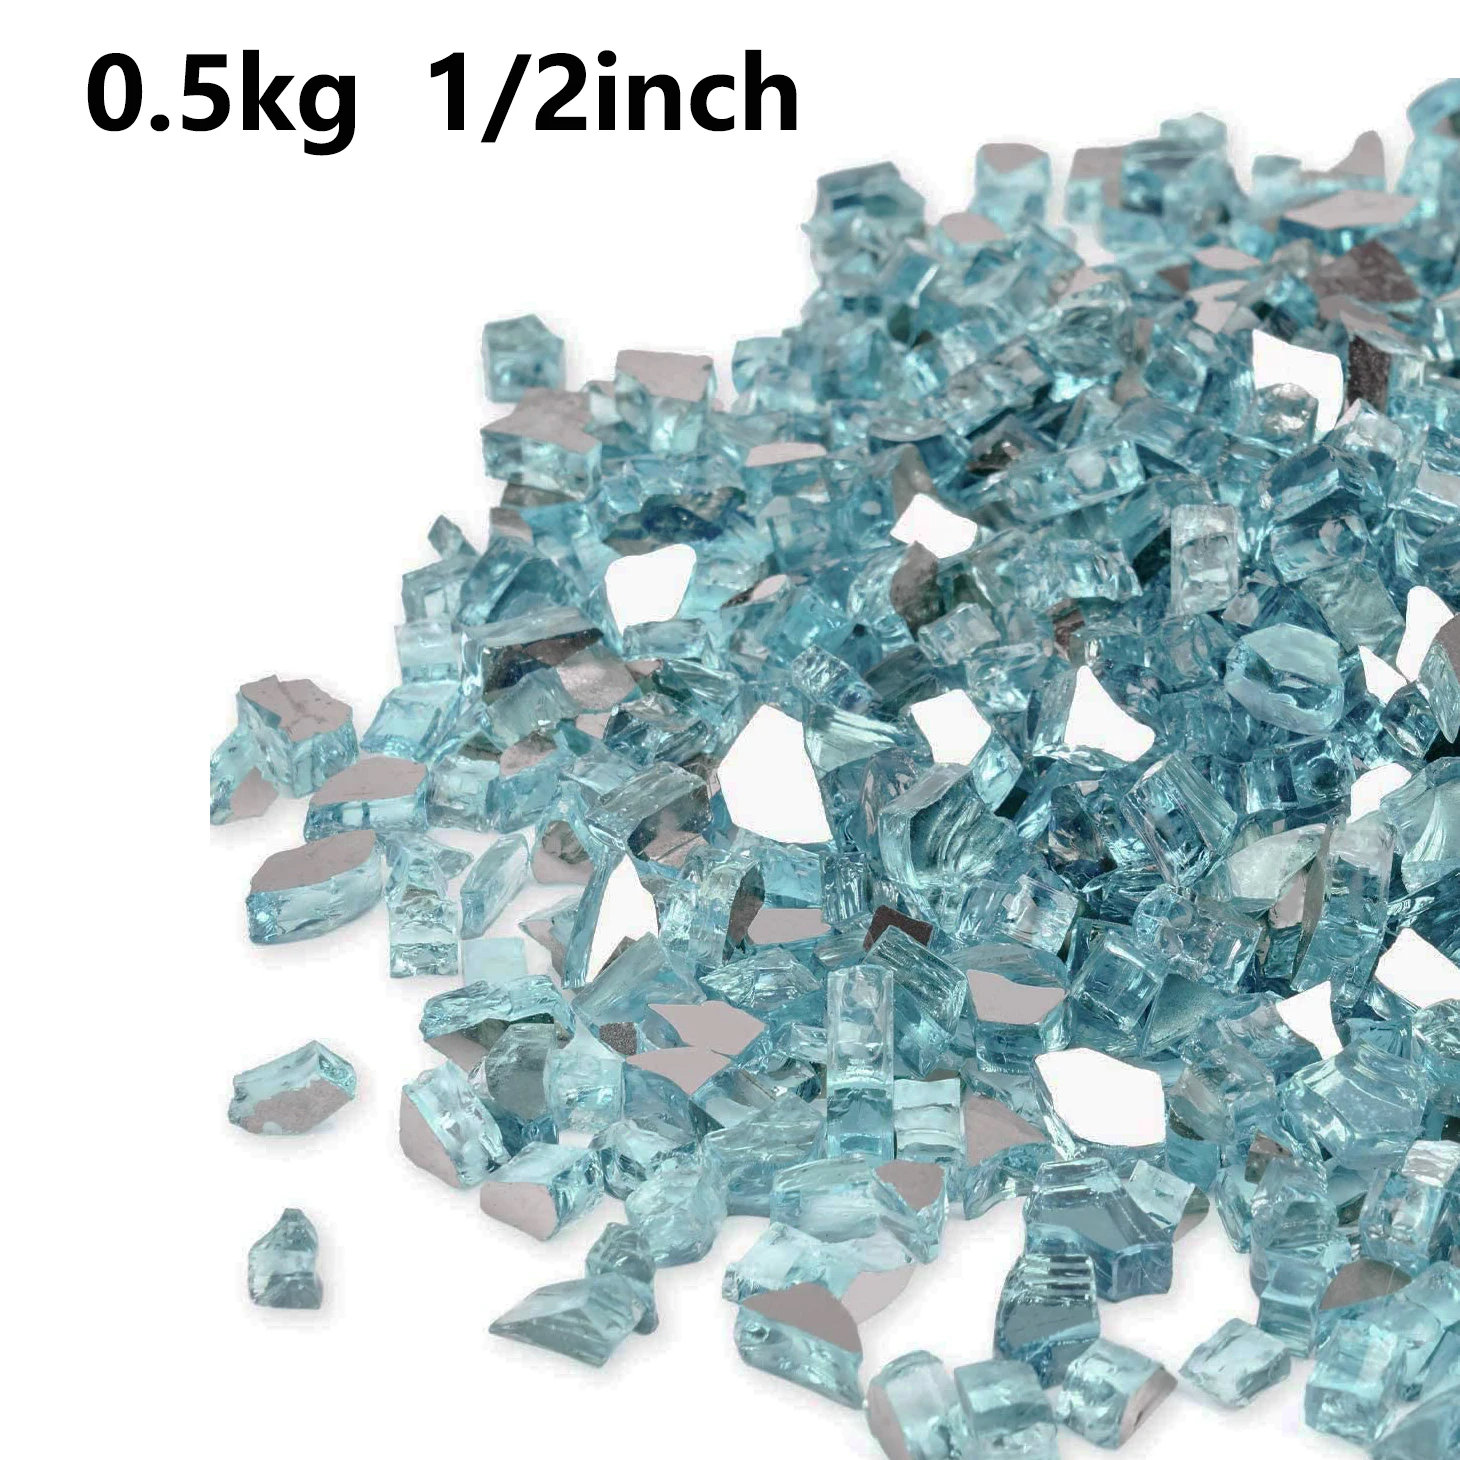 VDD Hotfix Rose Fire Glass Crystal Hot Fix Rhinestones Flatback Strass  Glitter Iron On Stone For Fabric Shoes Clothes Decoration